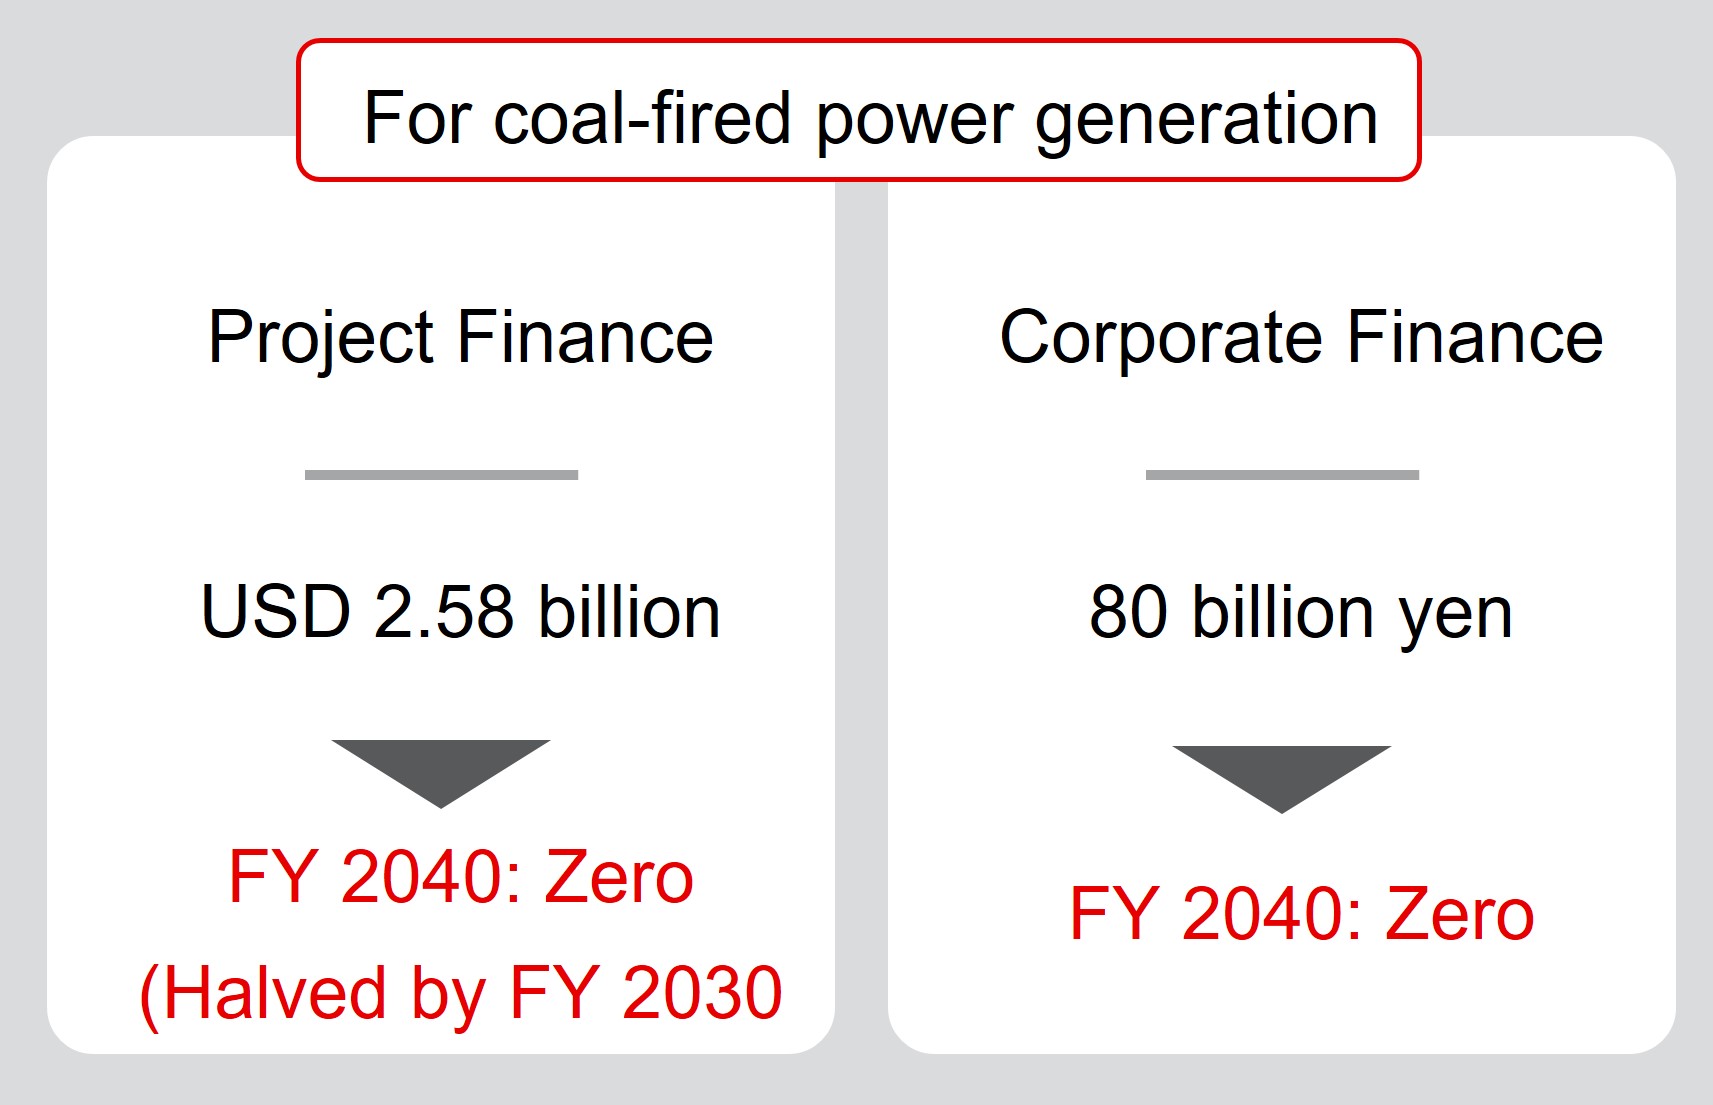 Corporate finance targets for coal-fired power